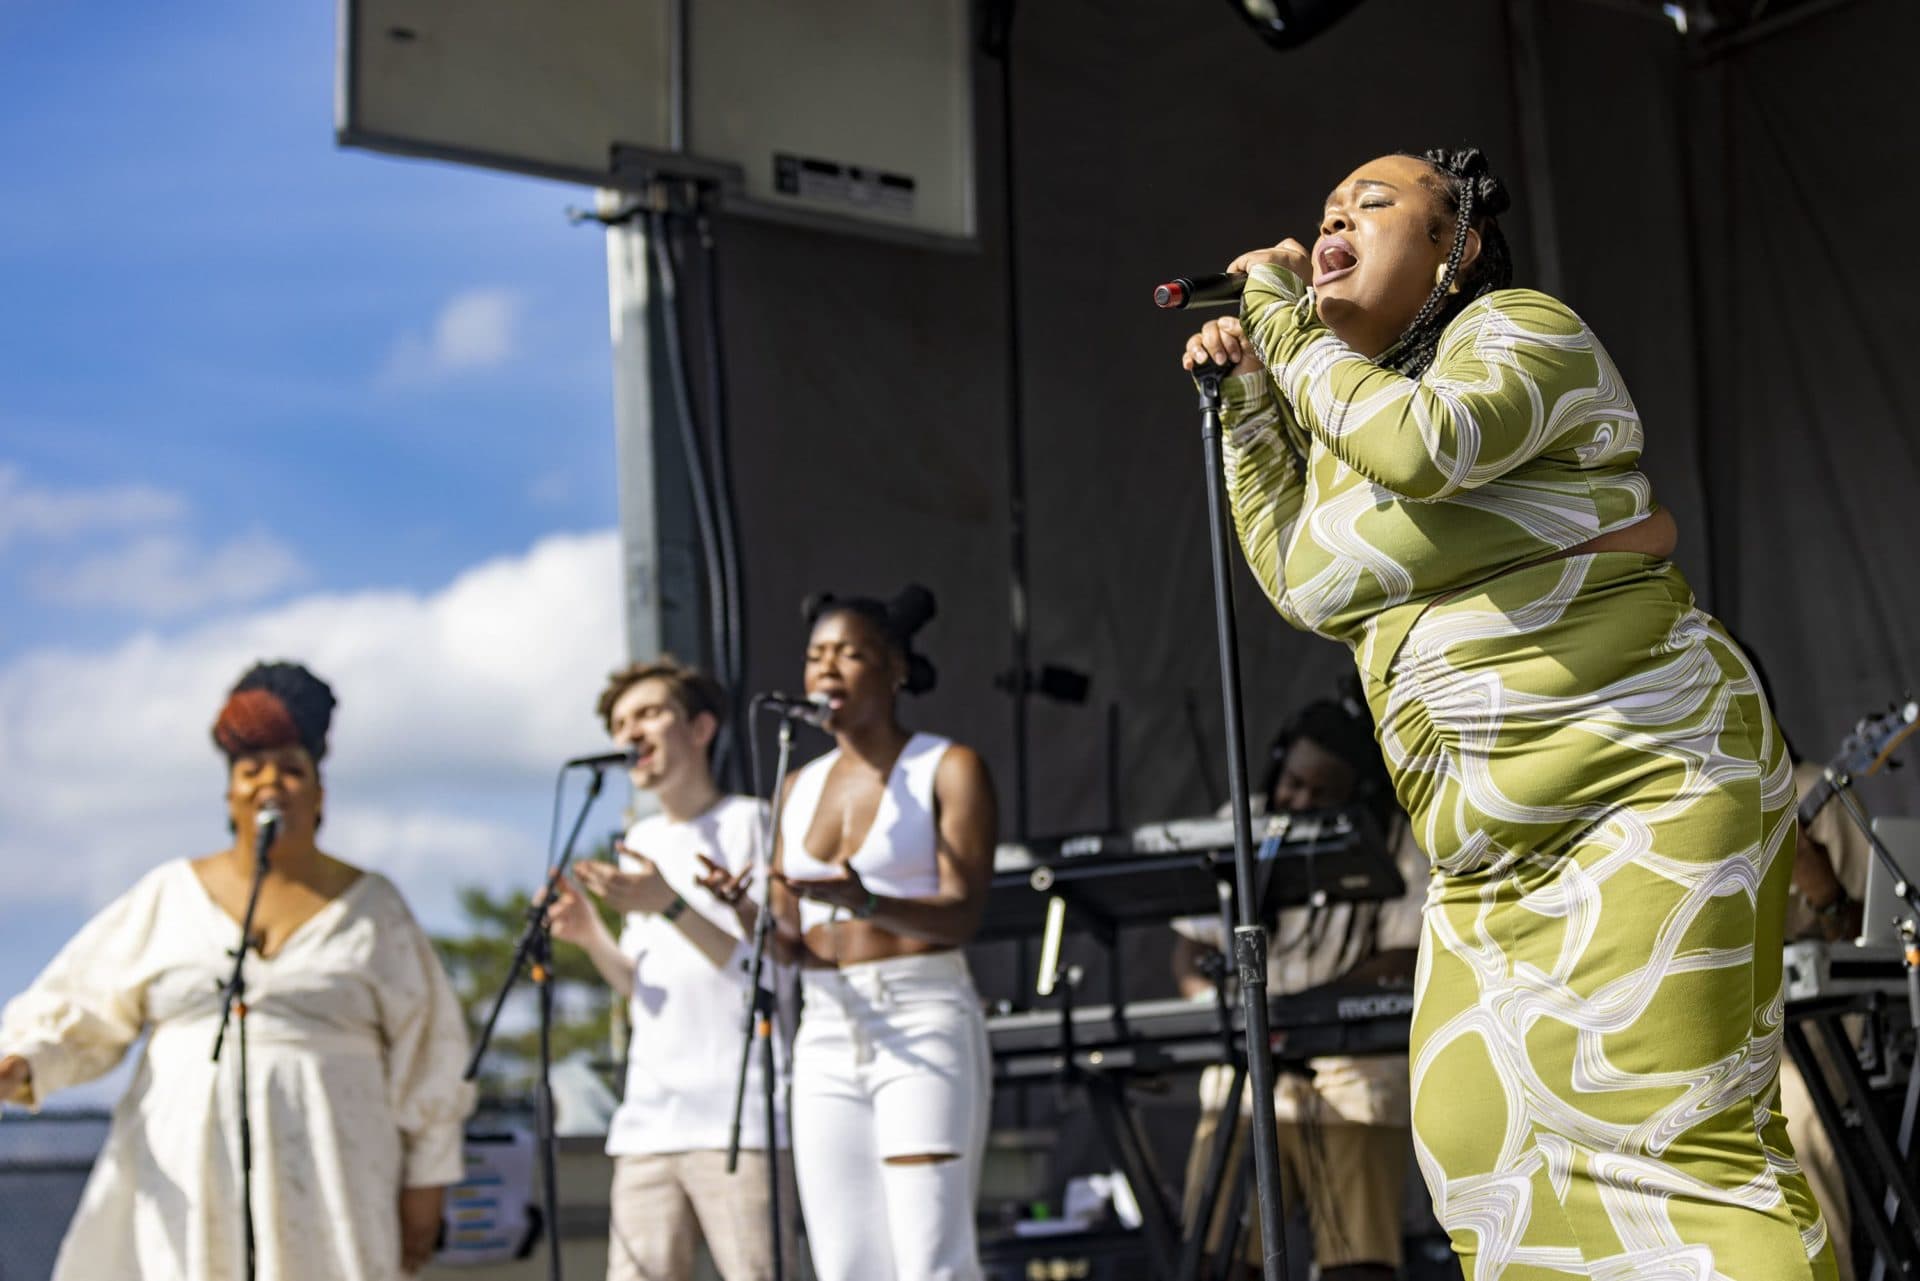 Miranda Rae performs on the local stage at the Boston Calling Music Festival. (Jesse Costa/WBUR)